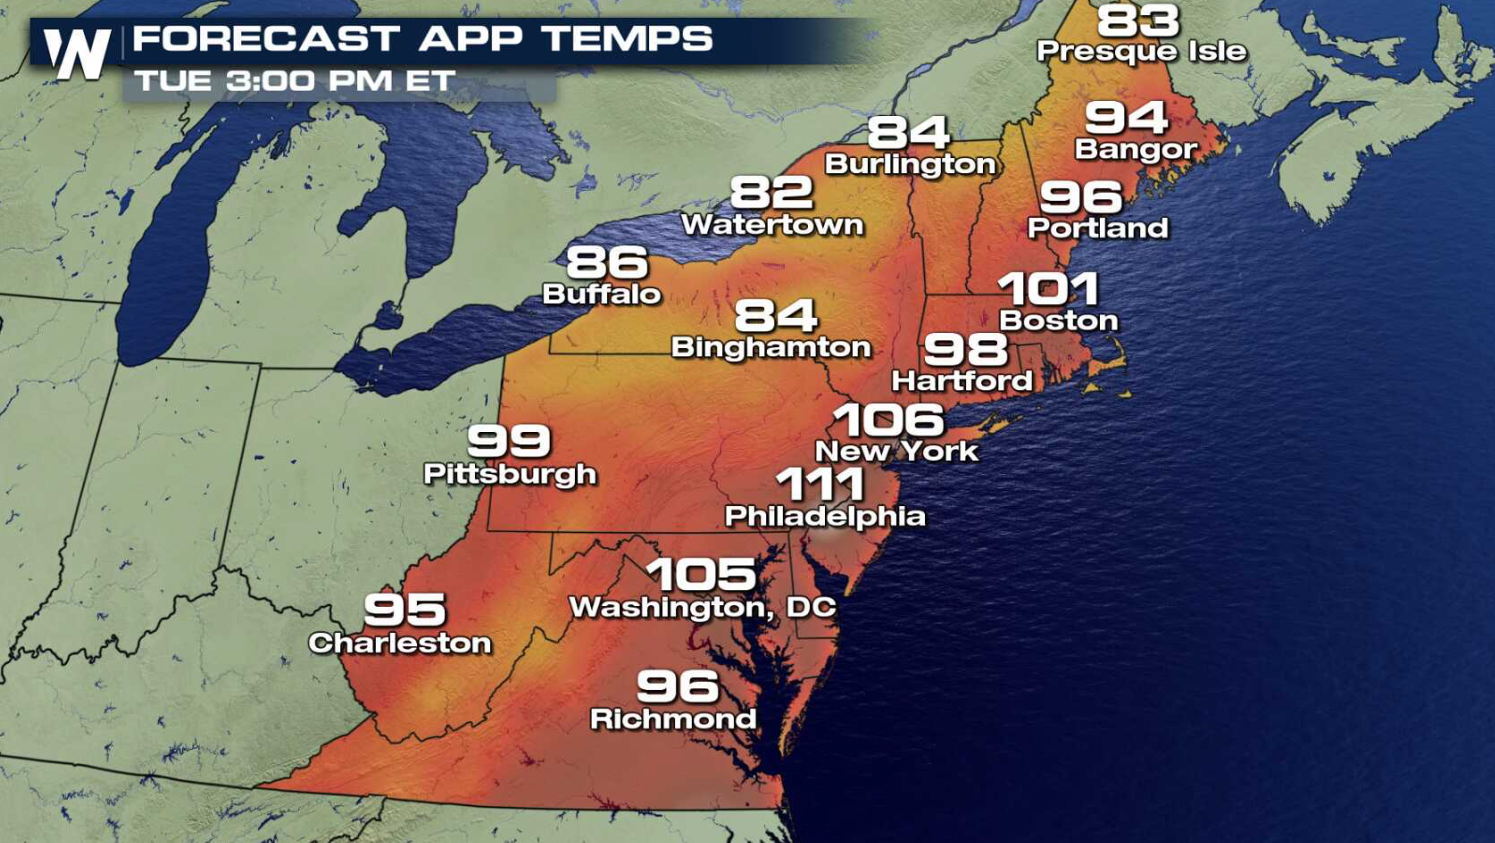 Heat Advisories Issued in the Northeast and Southeast